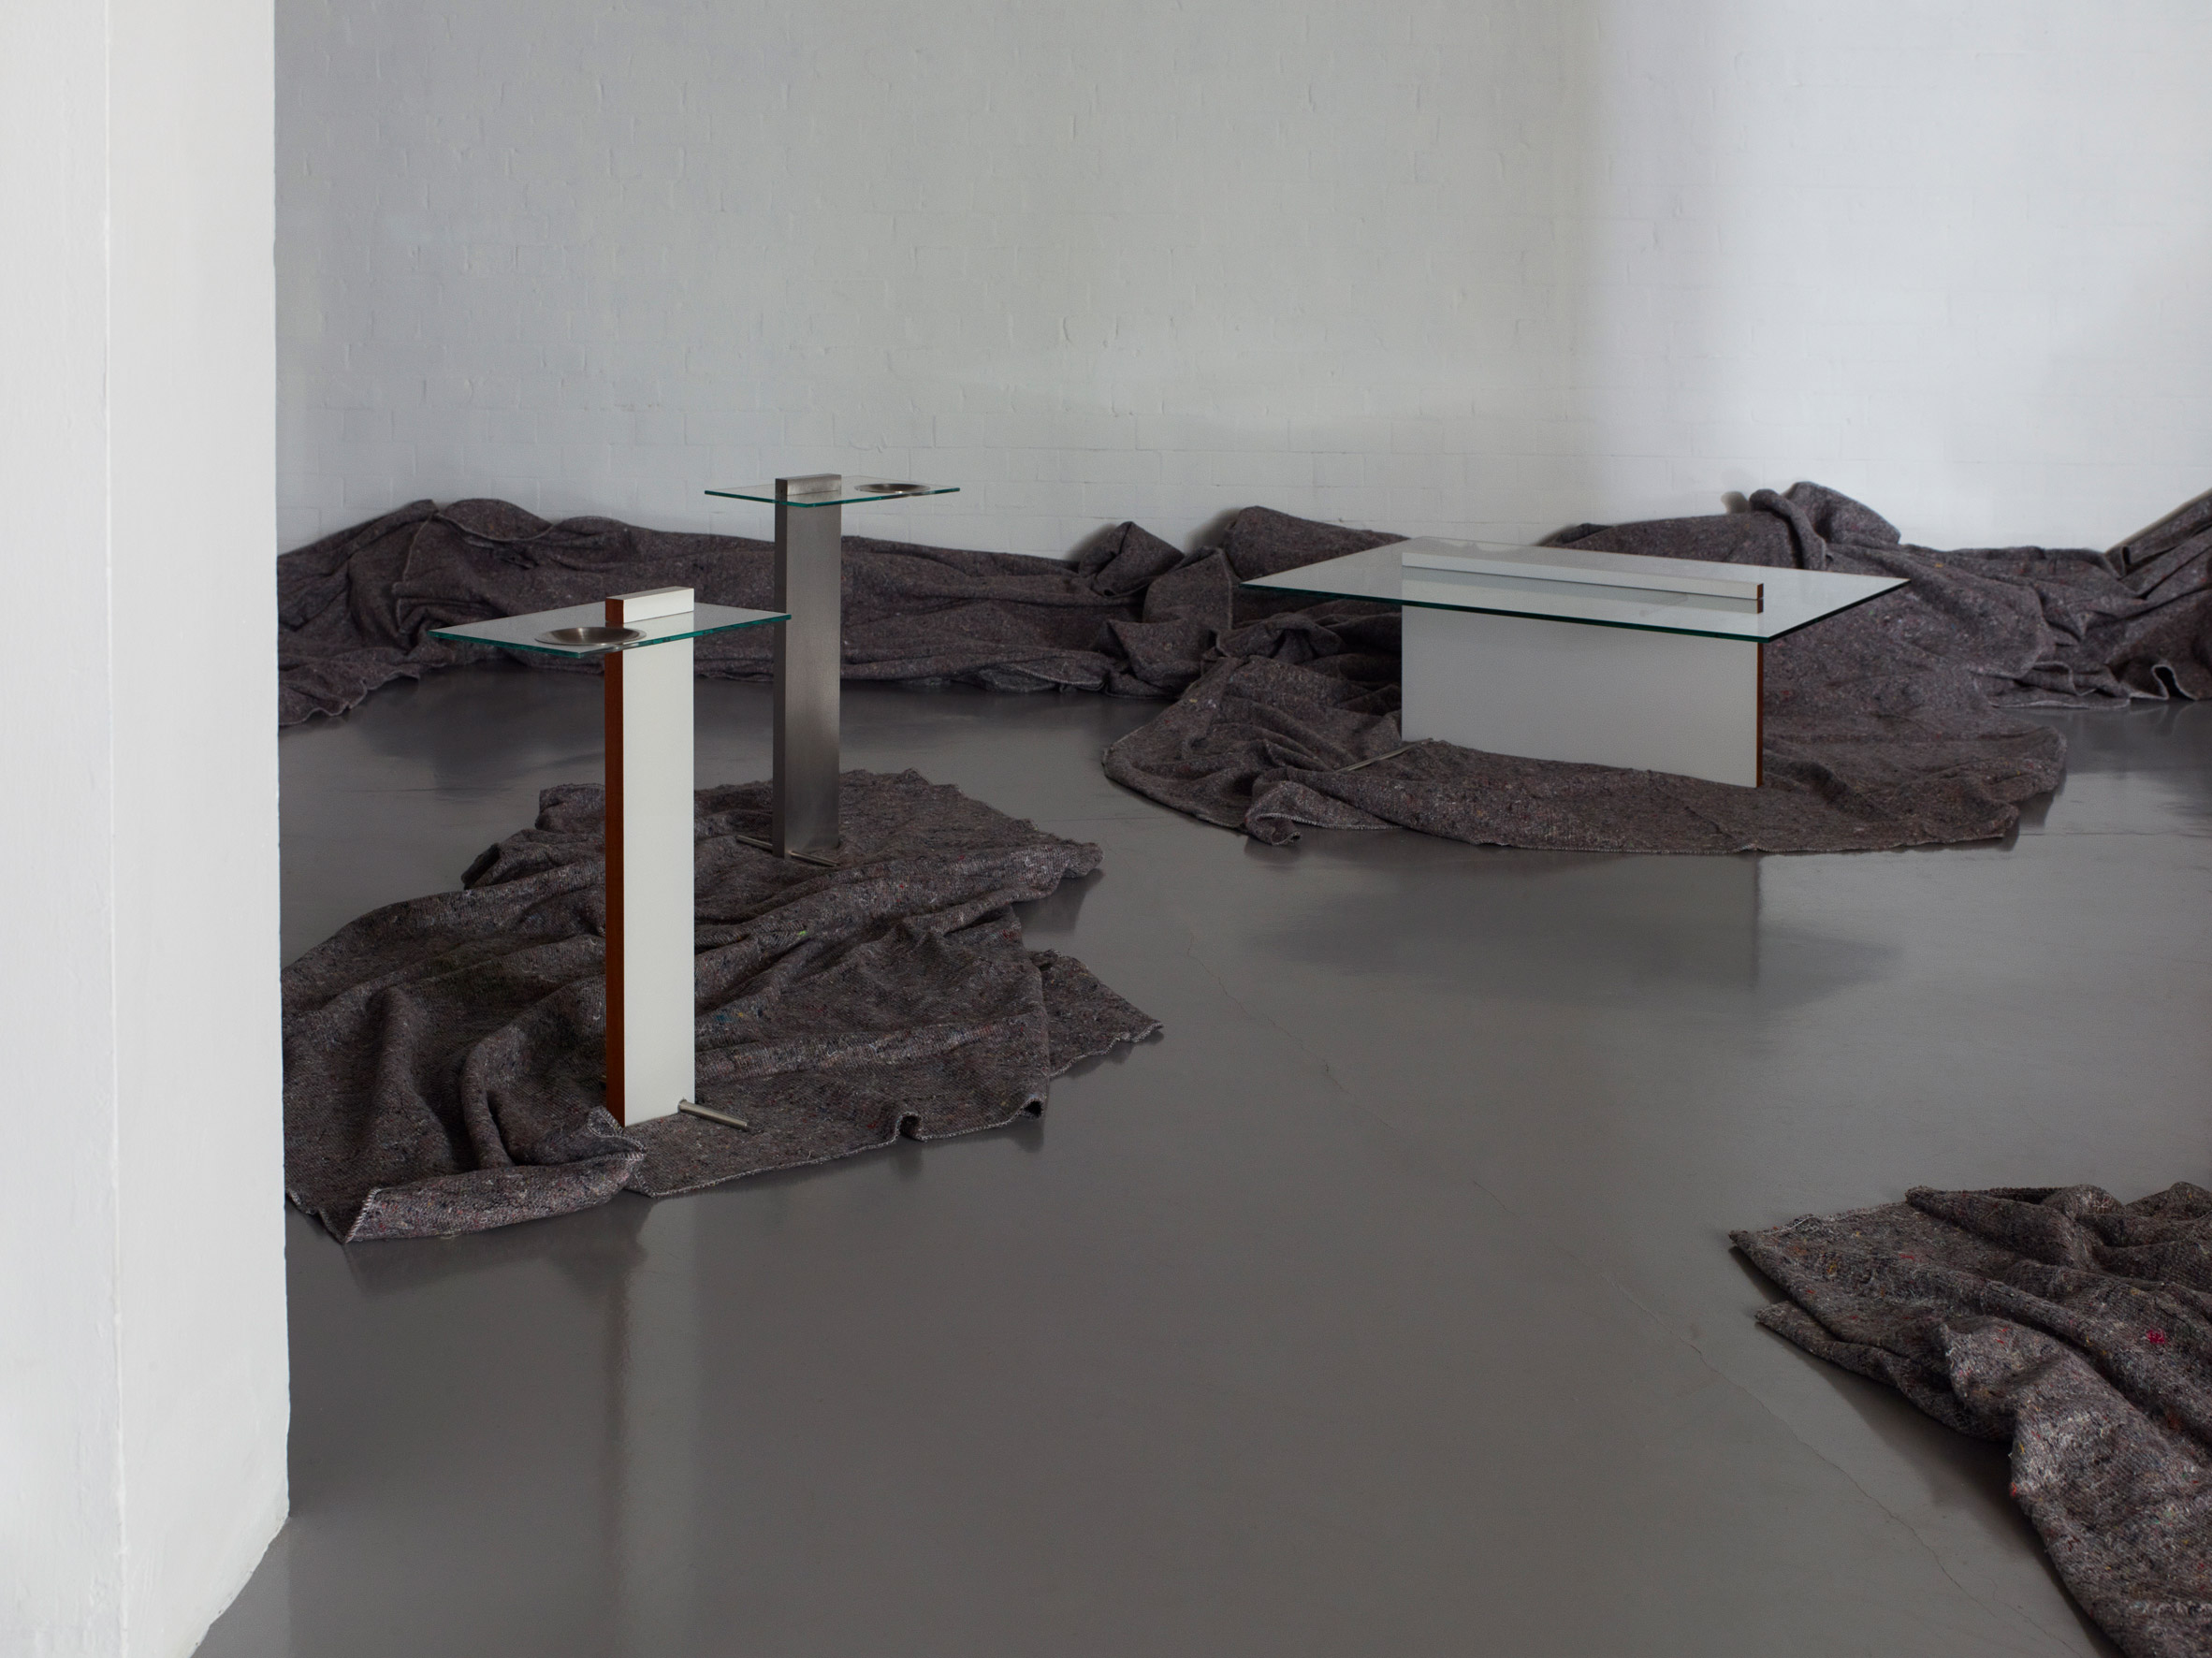 Stainless-steel tables by Amelia Stevens from Now 4 Then exhibition